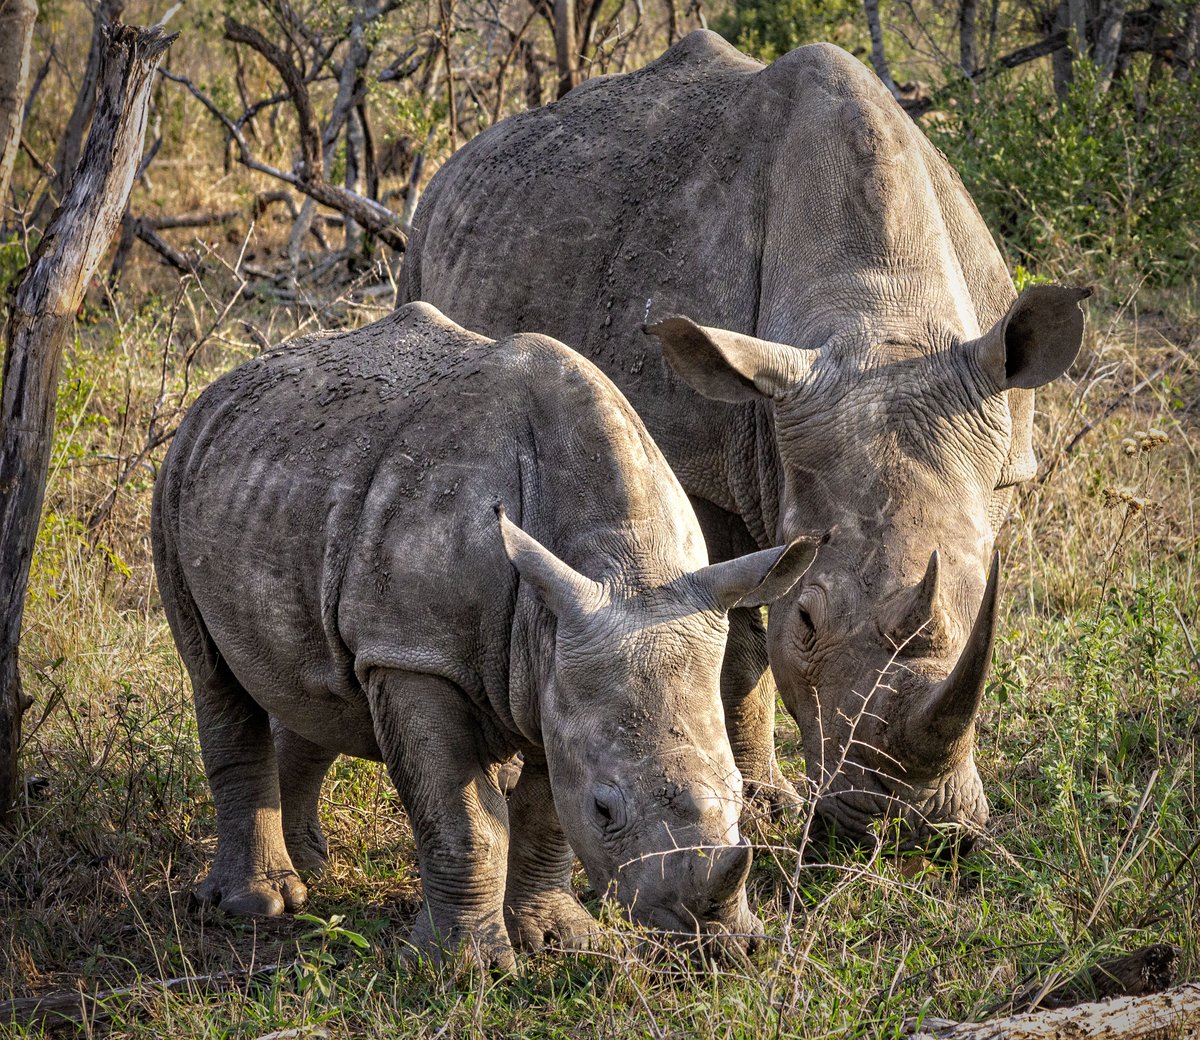 White rhino mother and baby taken at the Hluhluwe–iMfolozi Park in South Africa.

We stopped just a few feet away from them and they were quite happy with our presence.

#whiterhinoceros #motherandbabyrhino #rhino #safari #hluhluweimfolozi #hluhluwegamereserve #southafrica